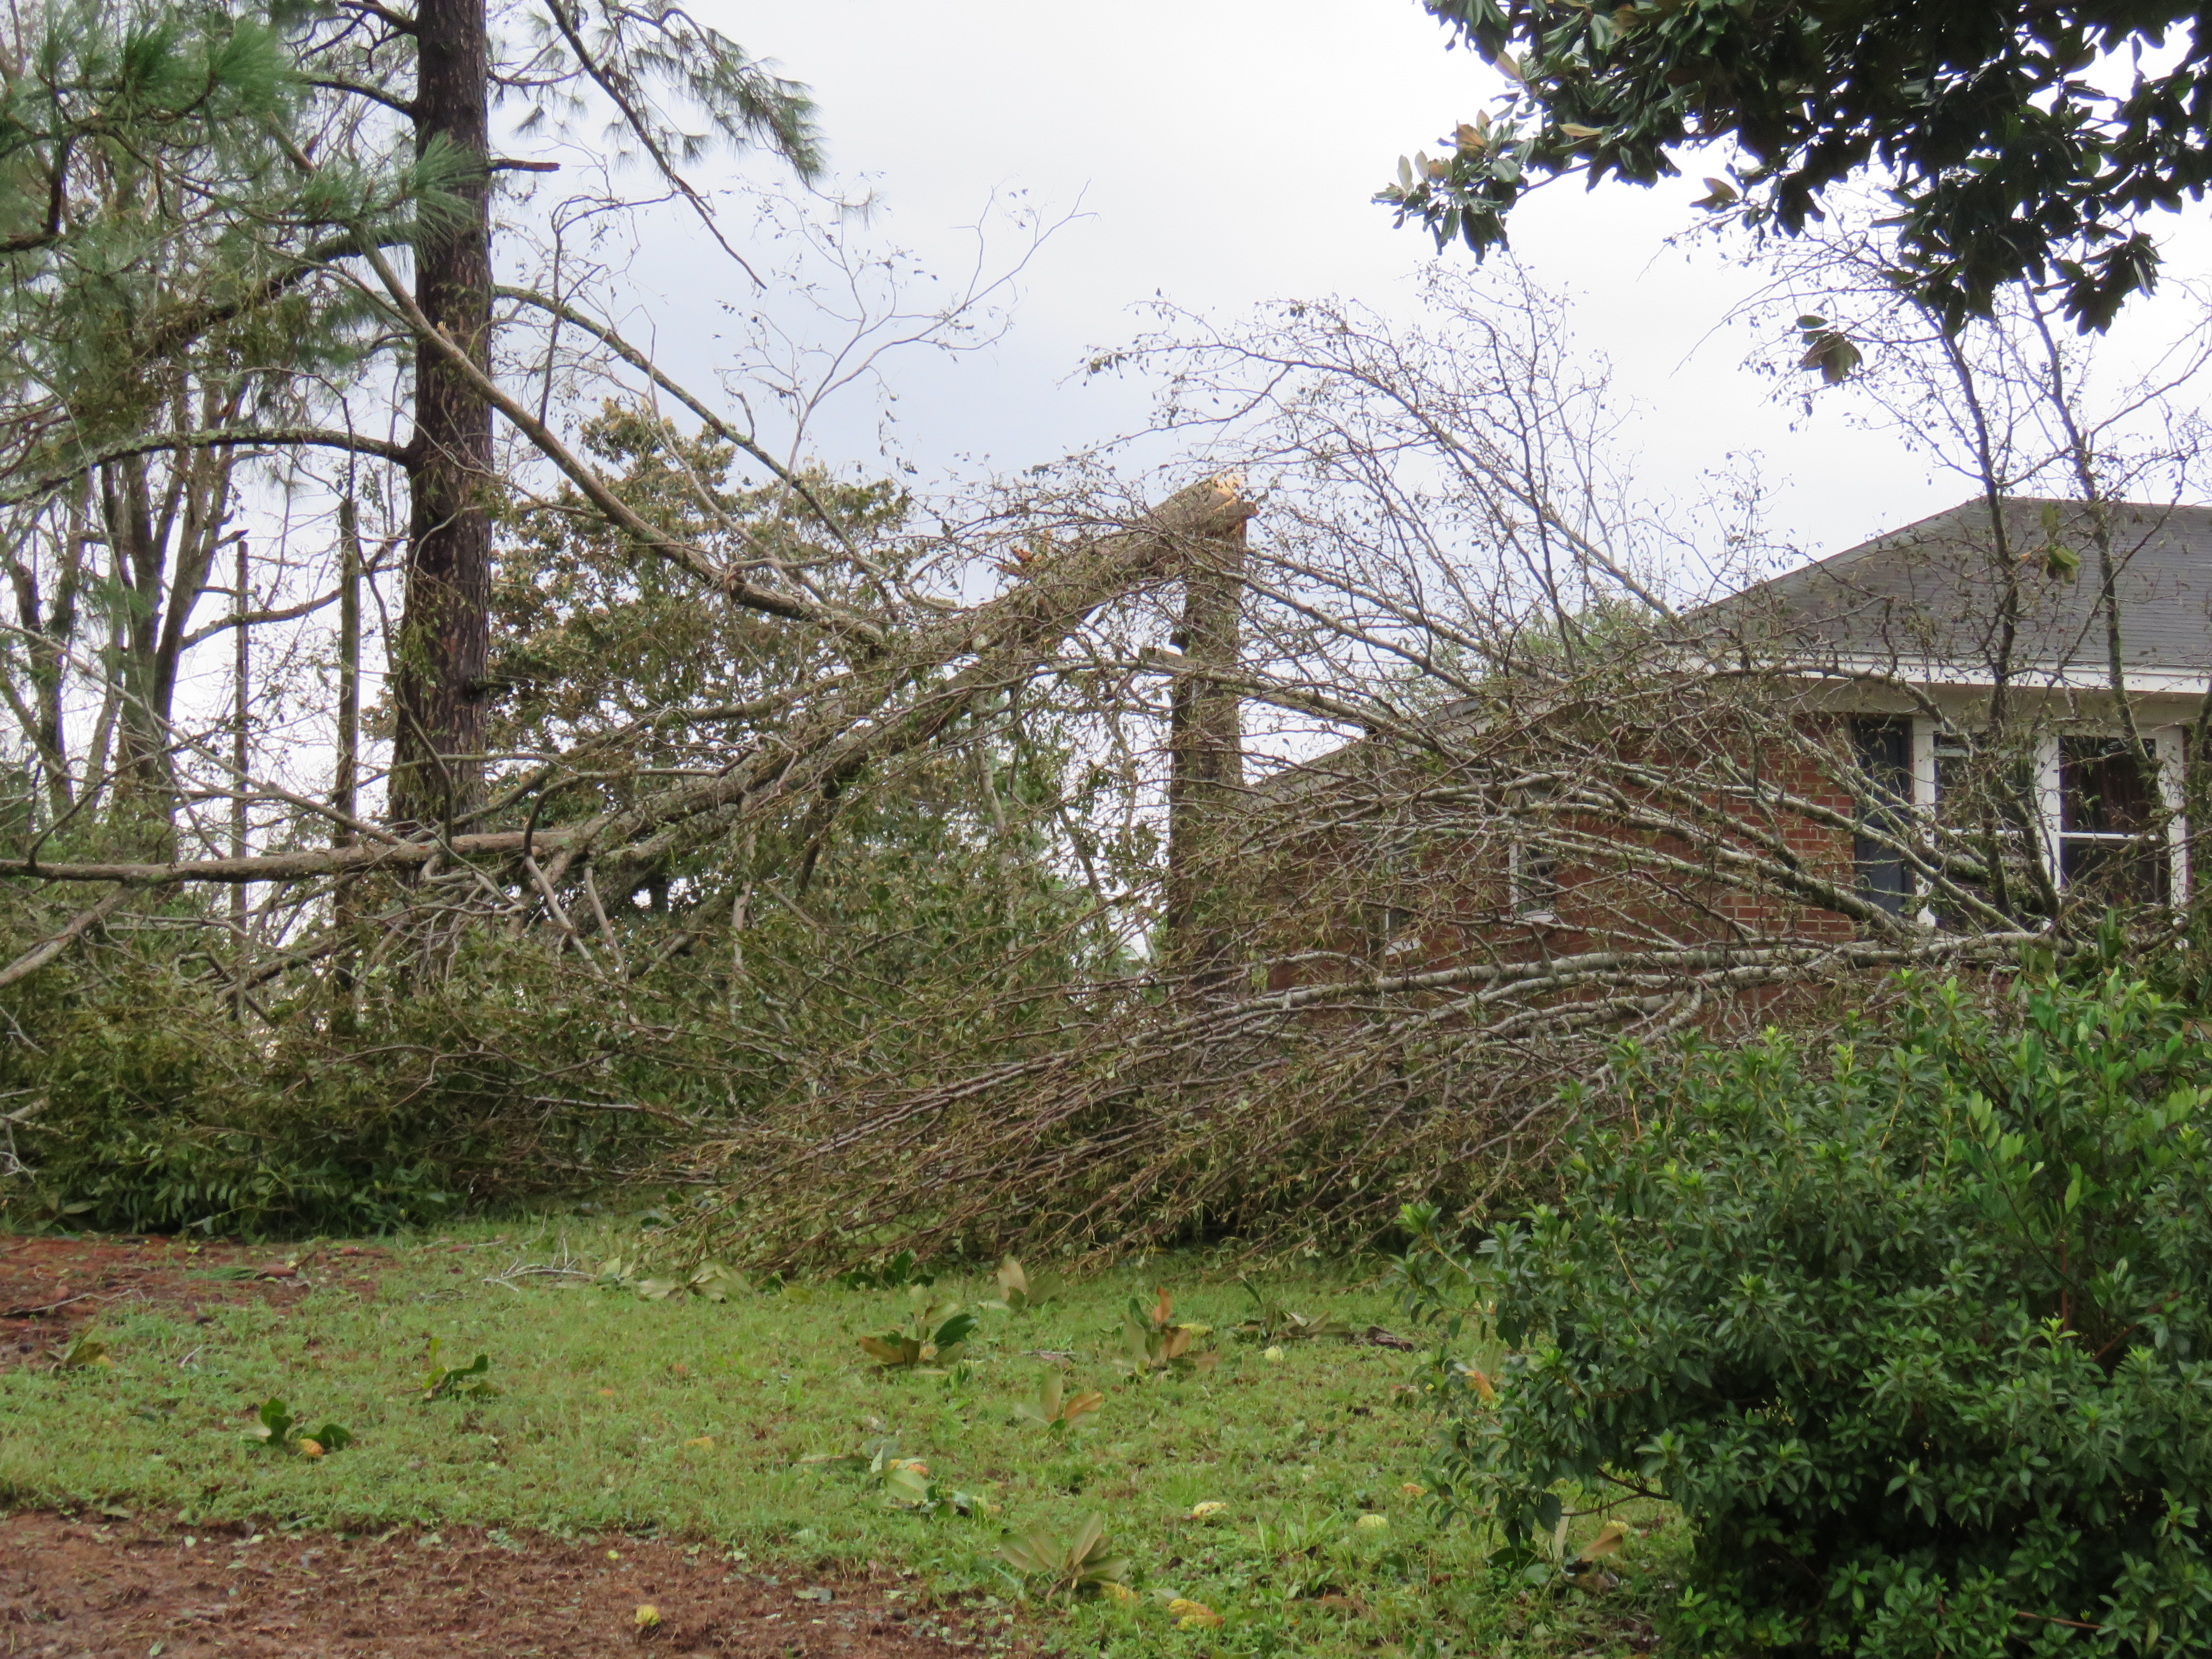 Wind damage across the Wilmington area was some of the worst in modern memory, exceeding damage from Hurricanes Diana, Fran, Floyd, or Matthew.  (Photo credit: Tim Armstrong/NWS)